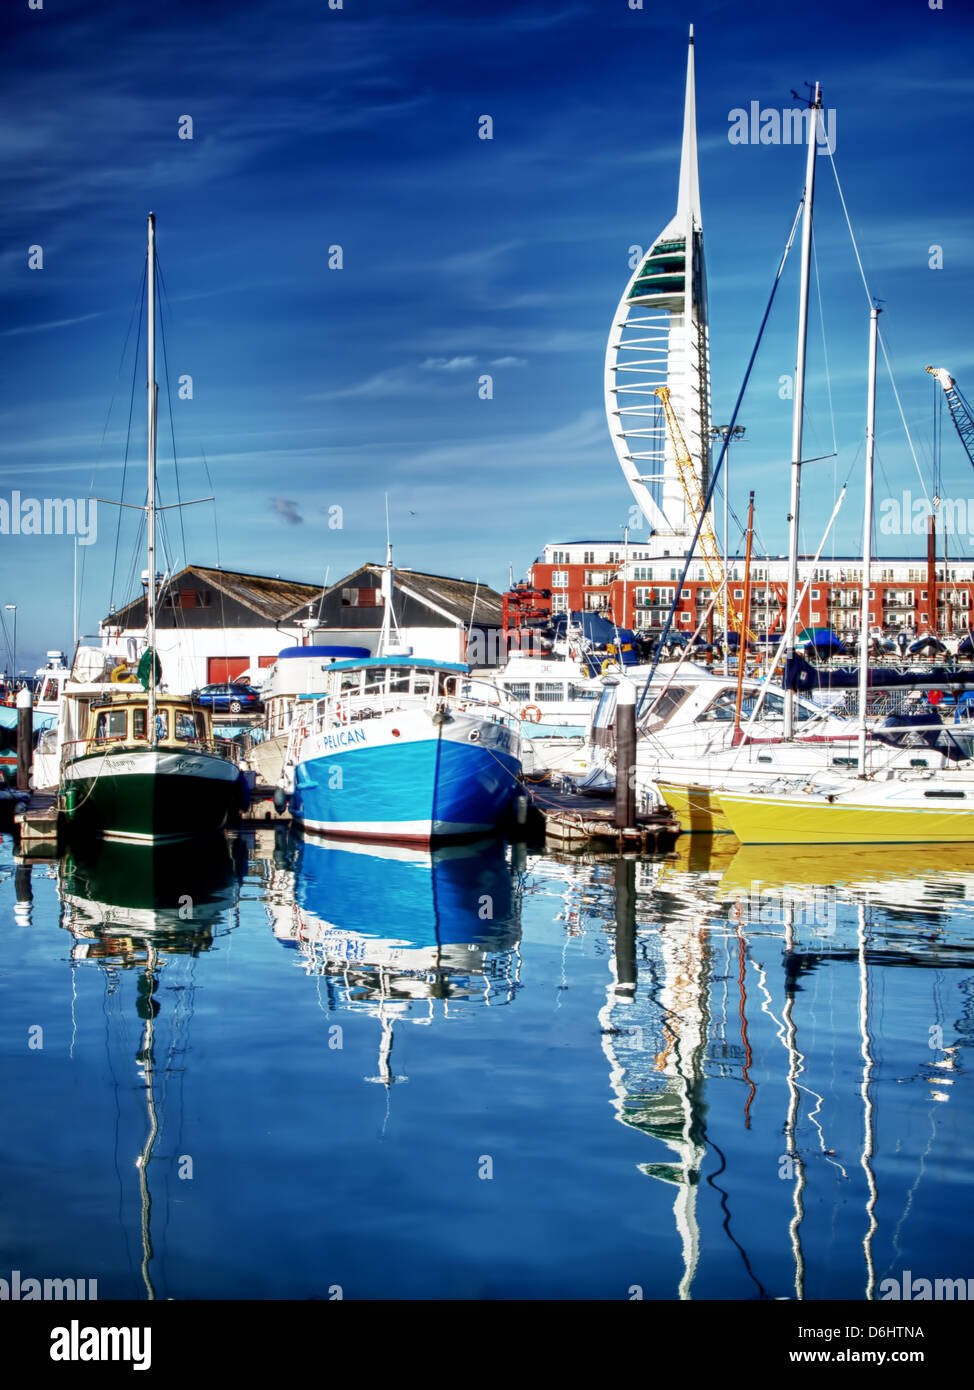 Boats berthed at Camber docks in Portsmouth Hampshire, with the Spinnaker Tower standing tall in the background Stock Photo